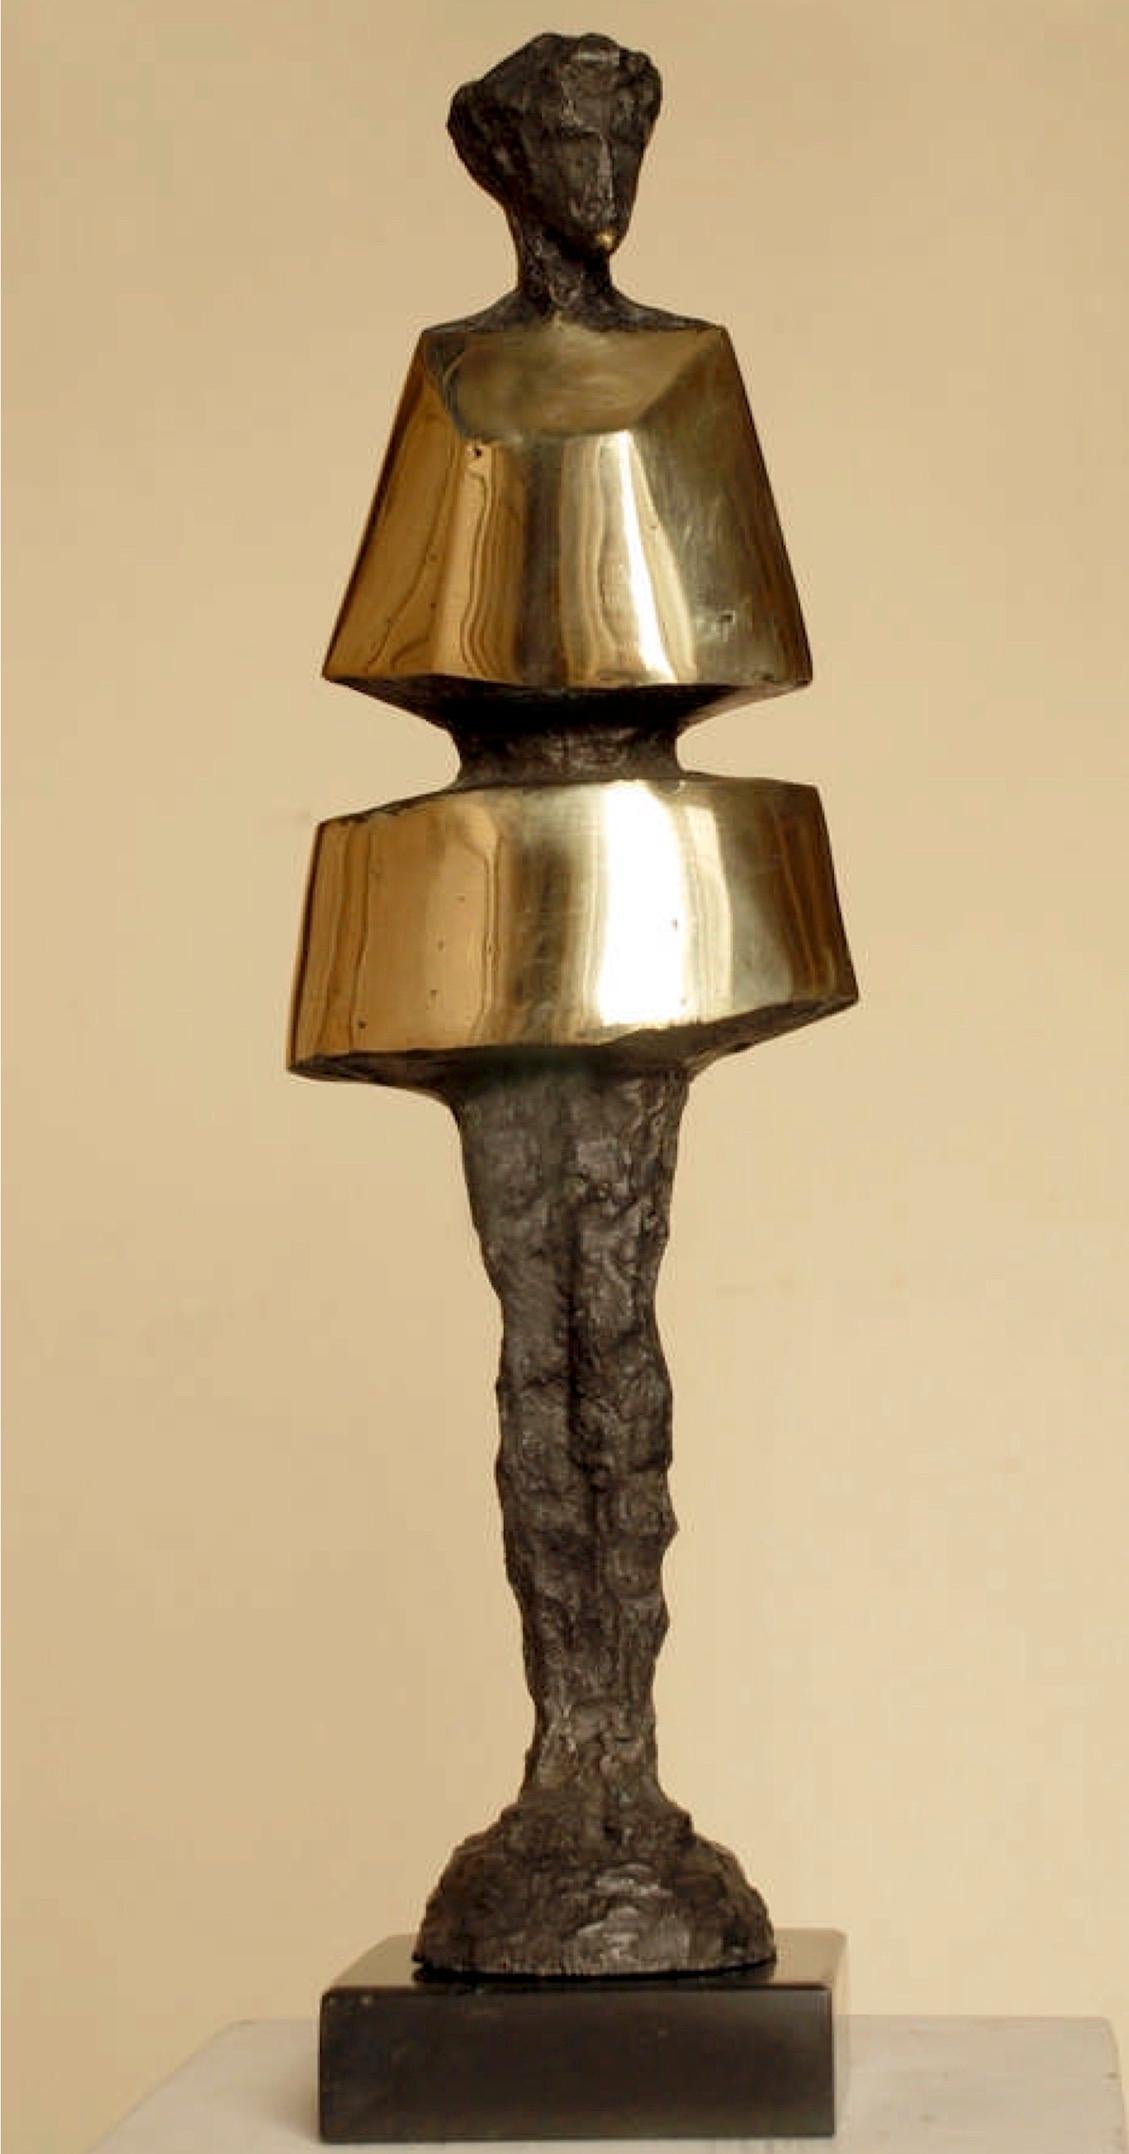 "Fashion Wear" Bronze Sculpture 15" x 5" x 3" inch by Sarkis Tossonian		

Sarkis Tossoonian was born in Alexandria in 1953. He graduated from the Faculty of Fine Arts/Sculpture in 1979. He started exhibiting in individual and group exhibitions in